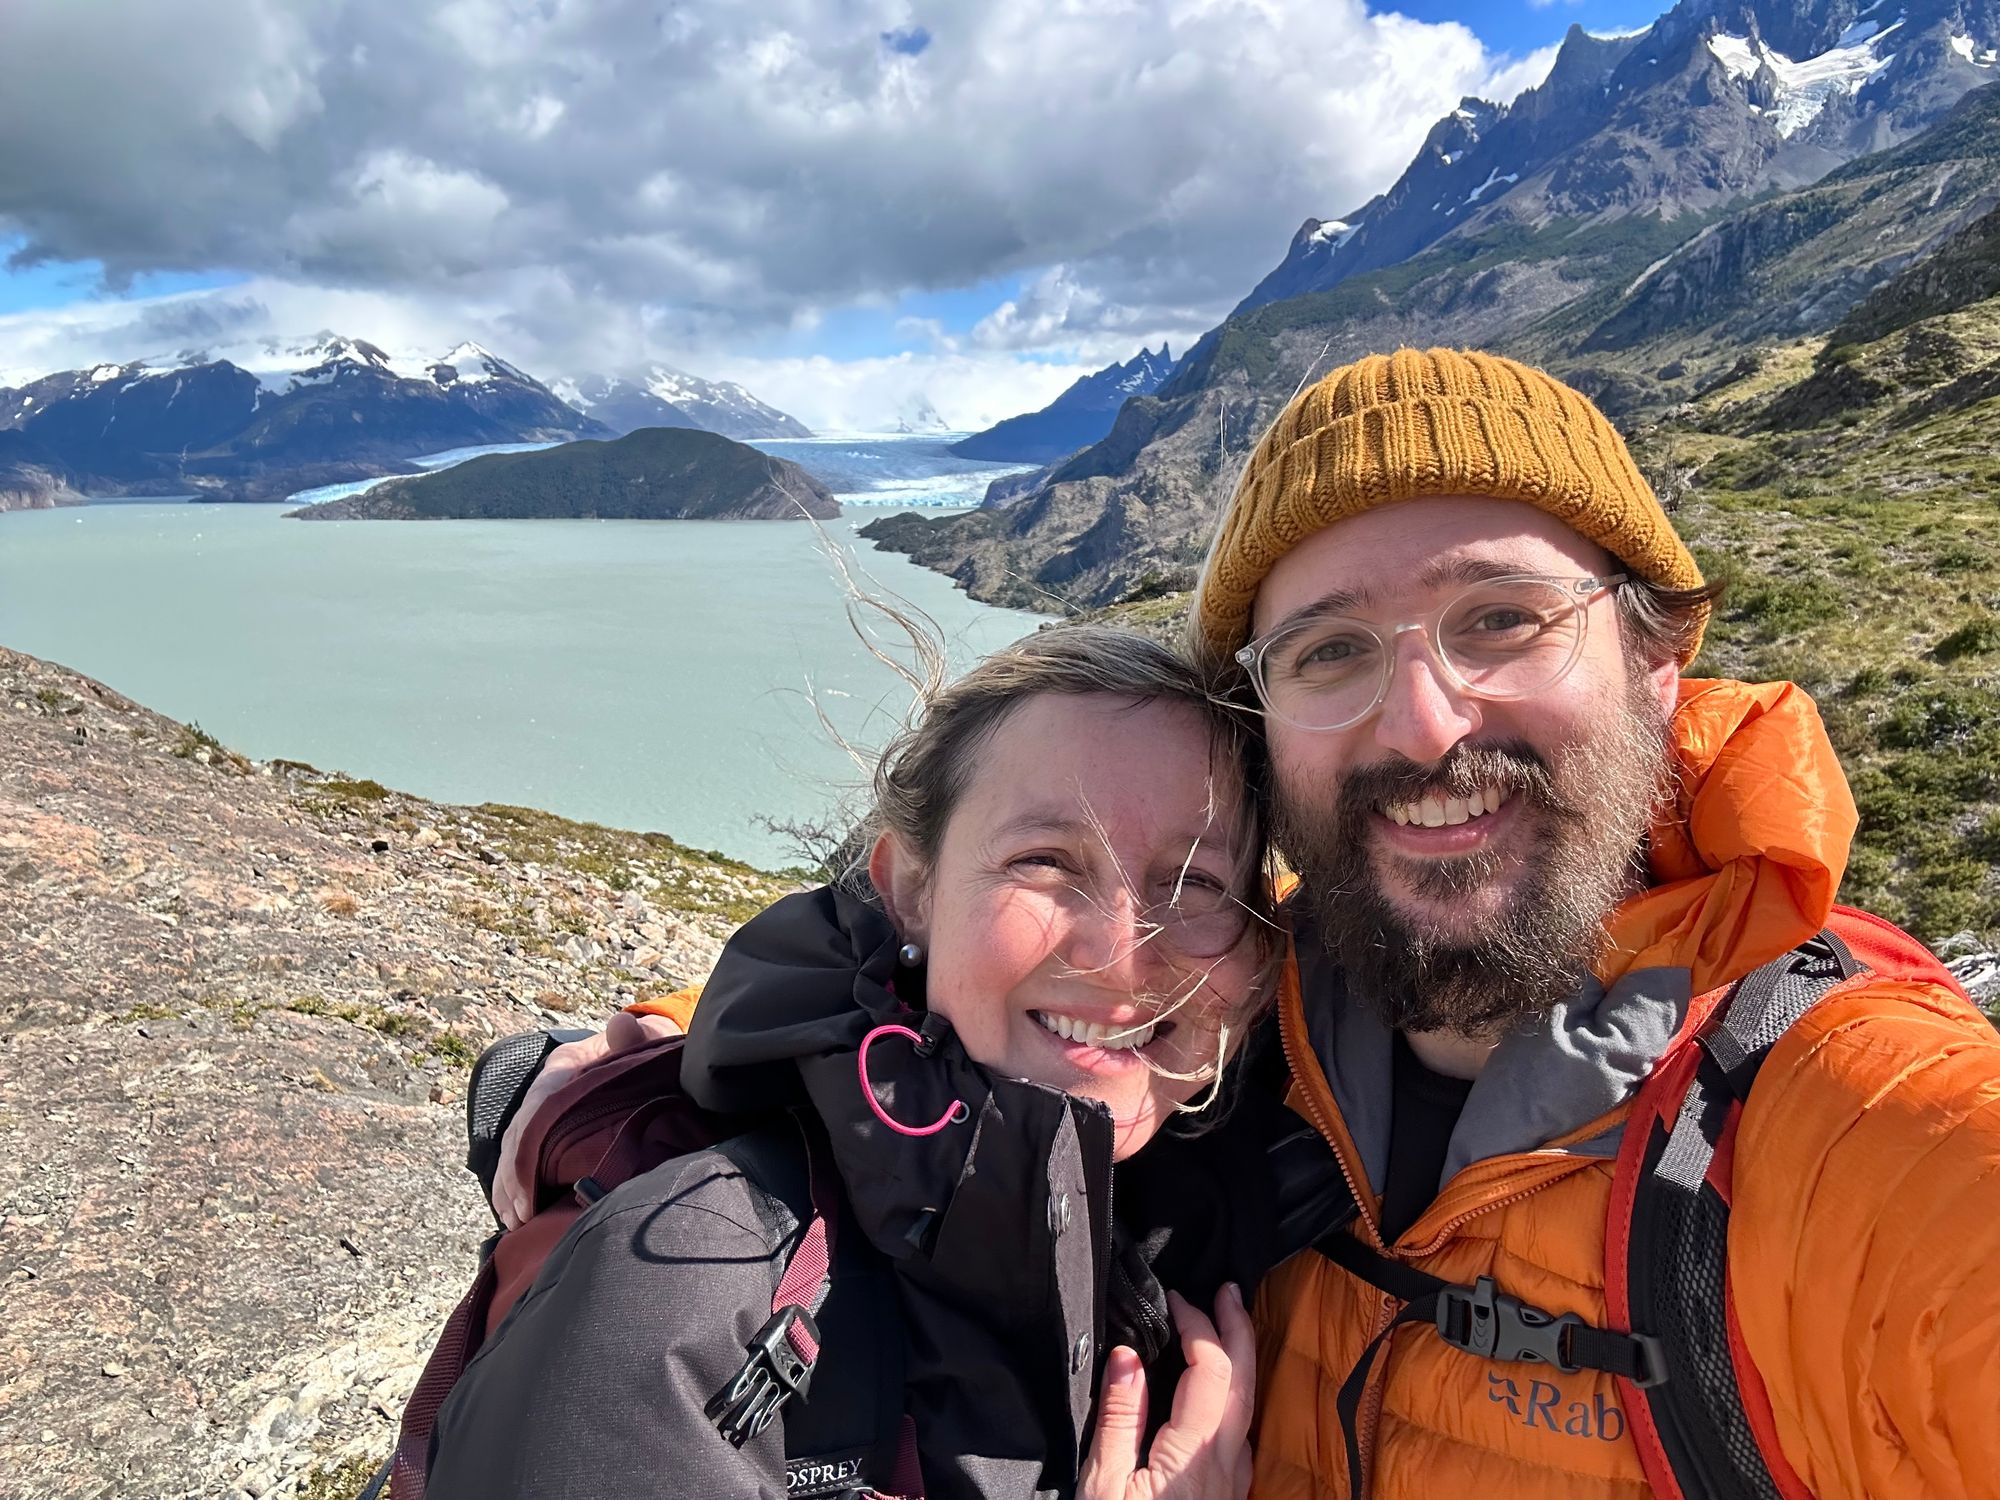 A Patagonian love story